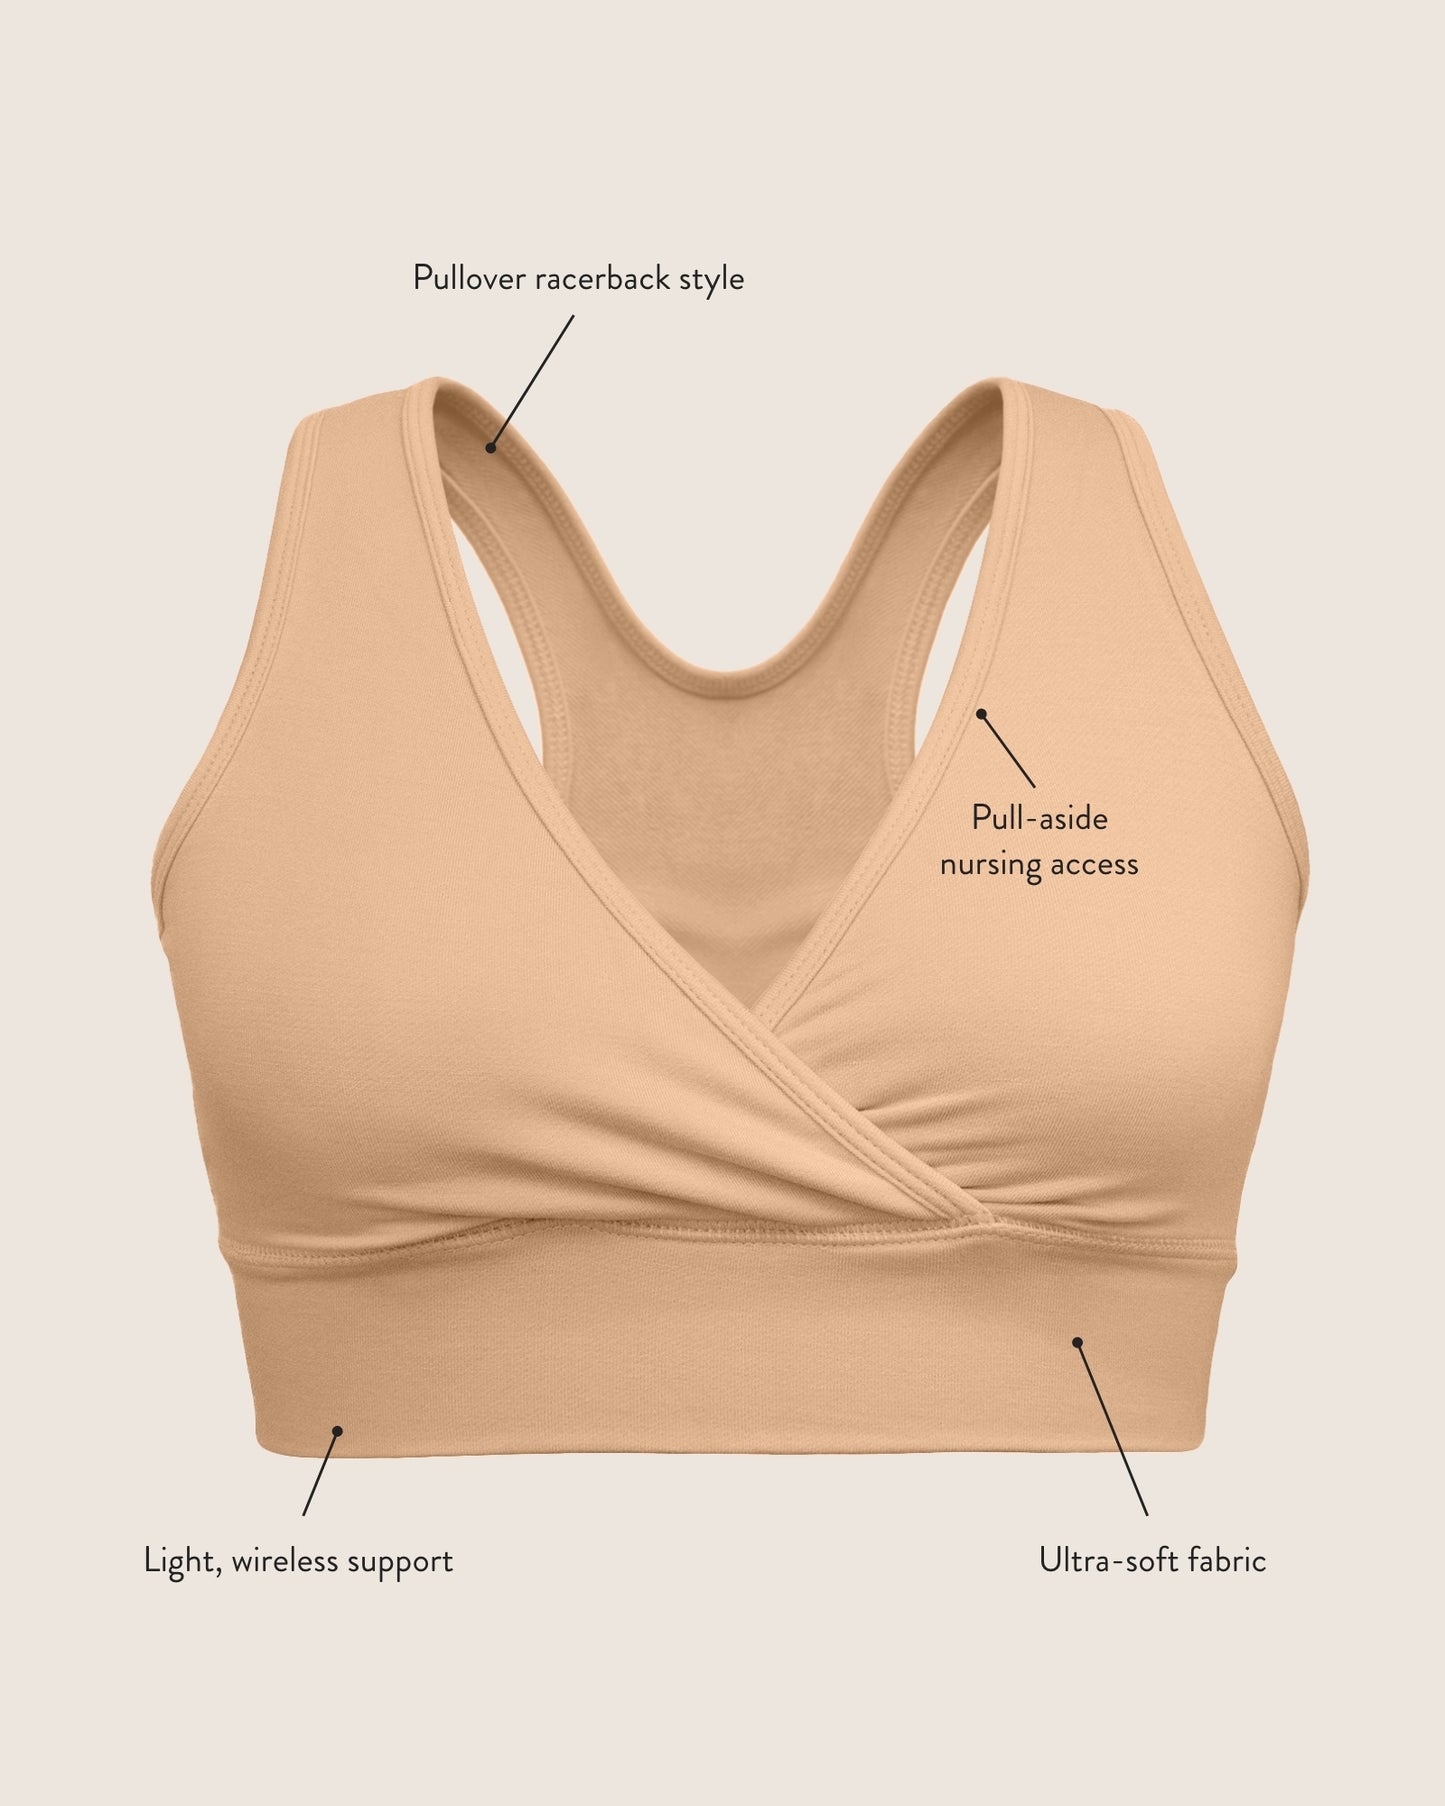 Infographic highlighting the benefits of the French Terry Nursing bra like the Pull-aside nursing access, wireless support and ultra-soft fabric. 